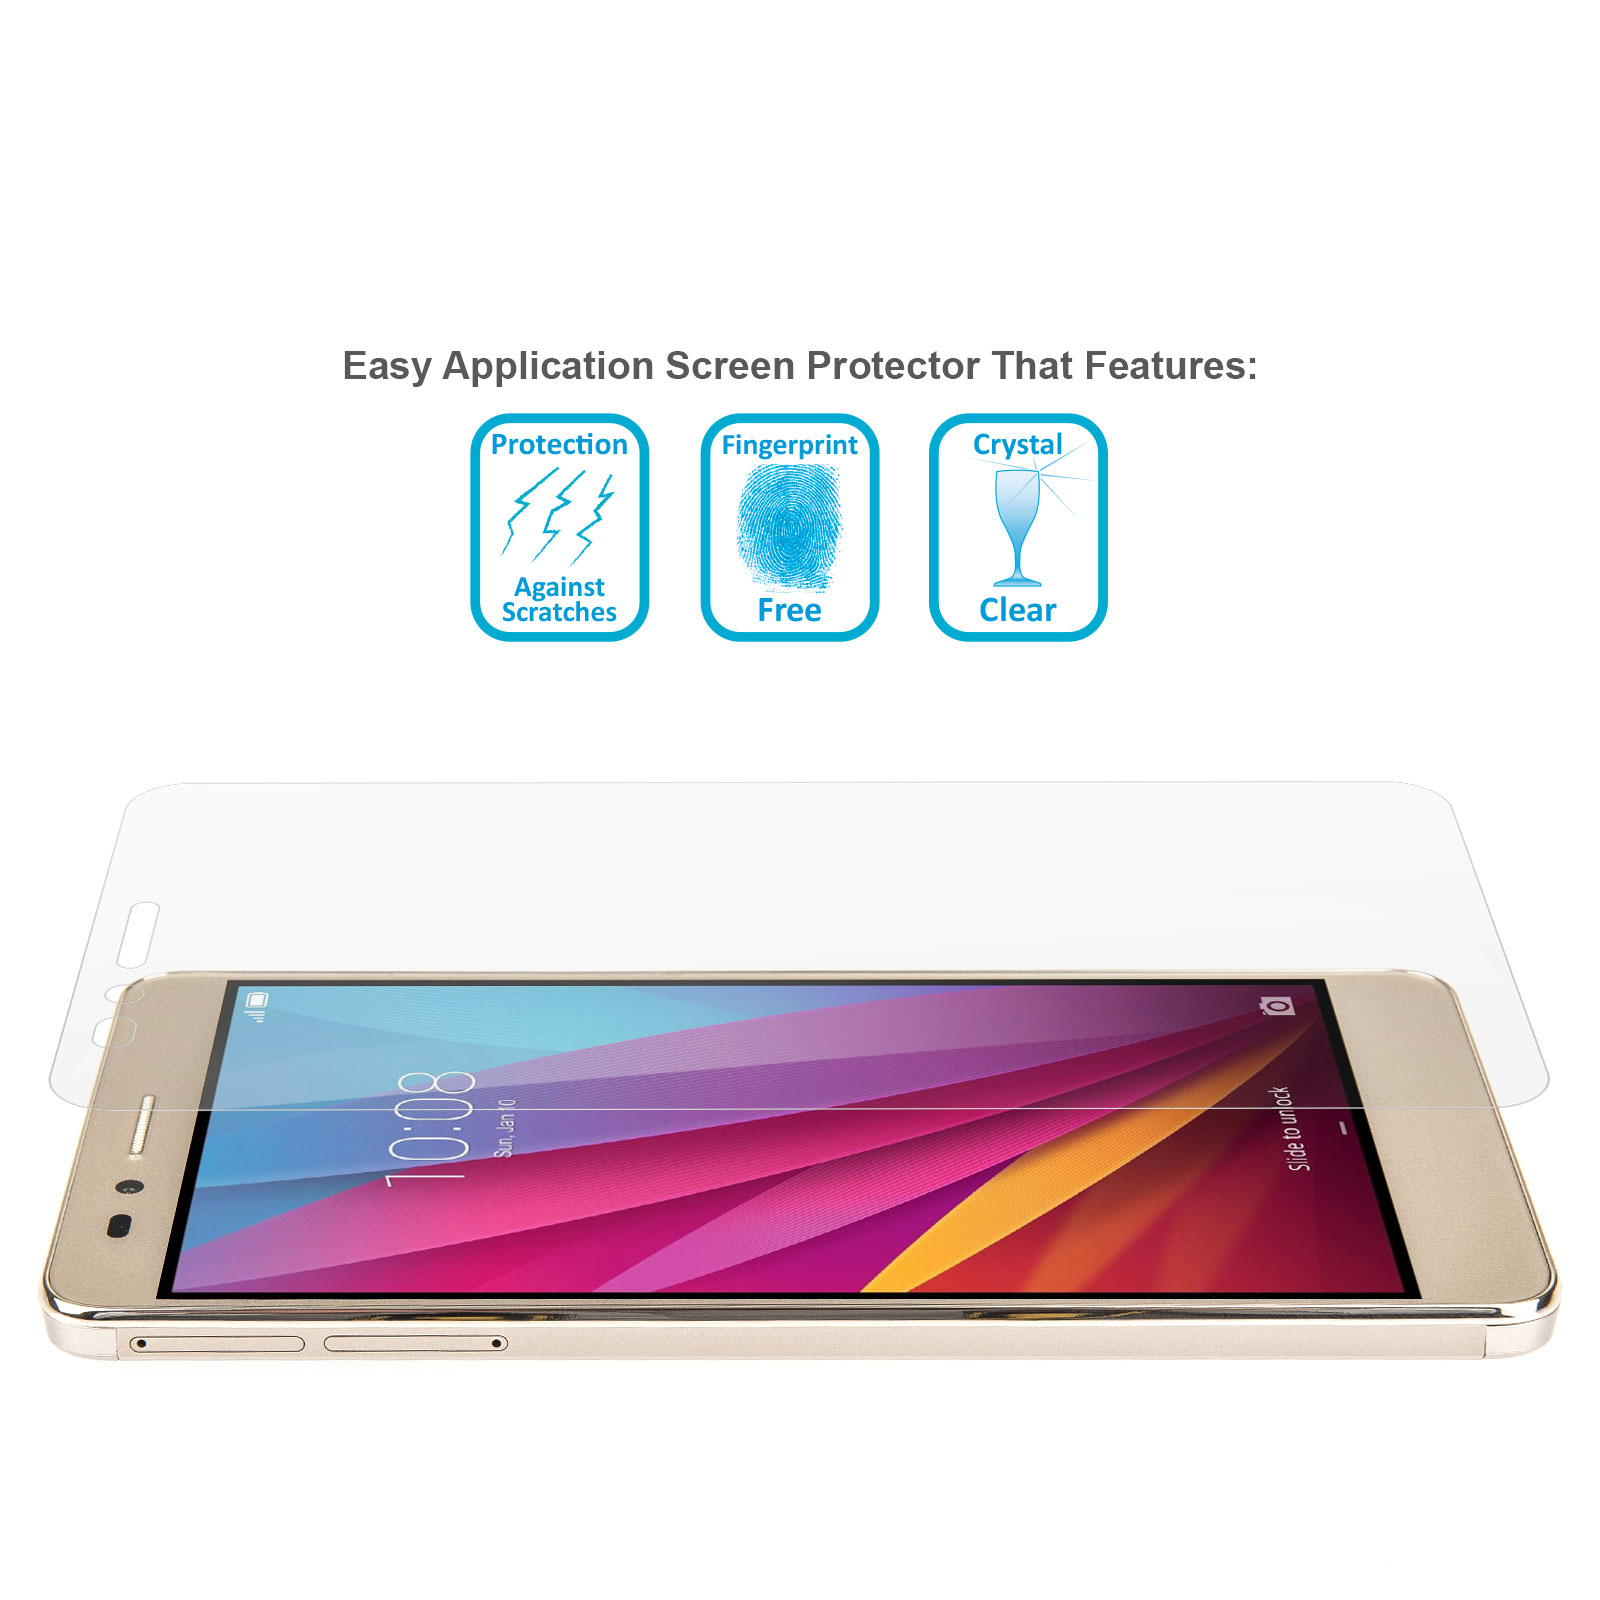 Yousave Accessories Huawei Honor 5X Screen Protectors x5